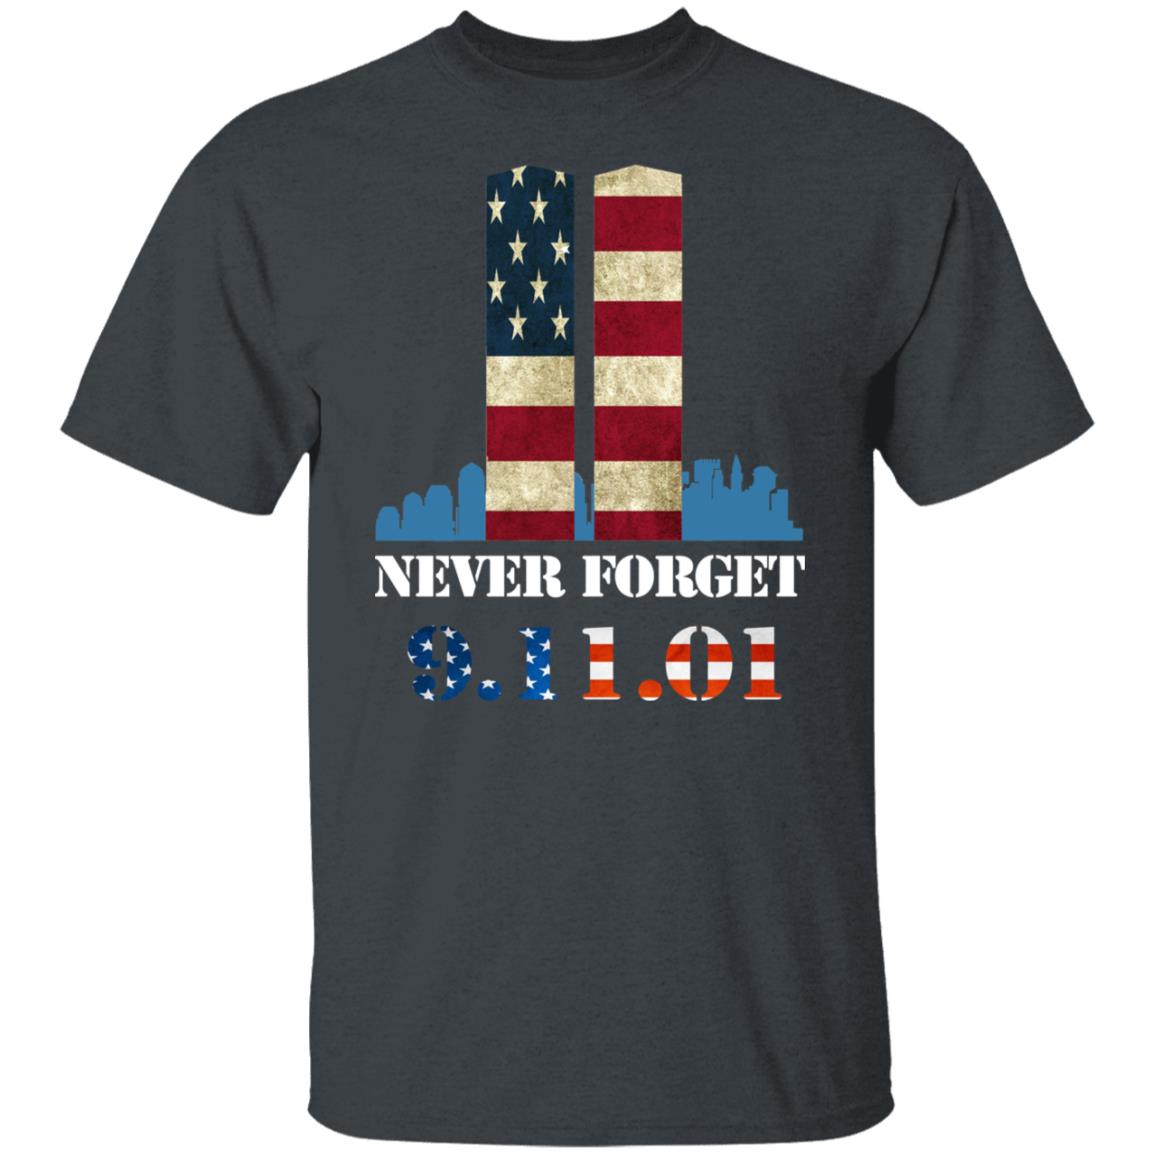 Mens Womens Never Forget Patriotic 911 American Flag T-Shirt